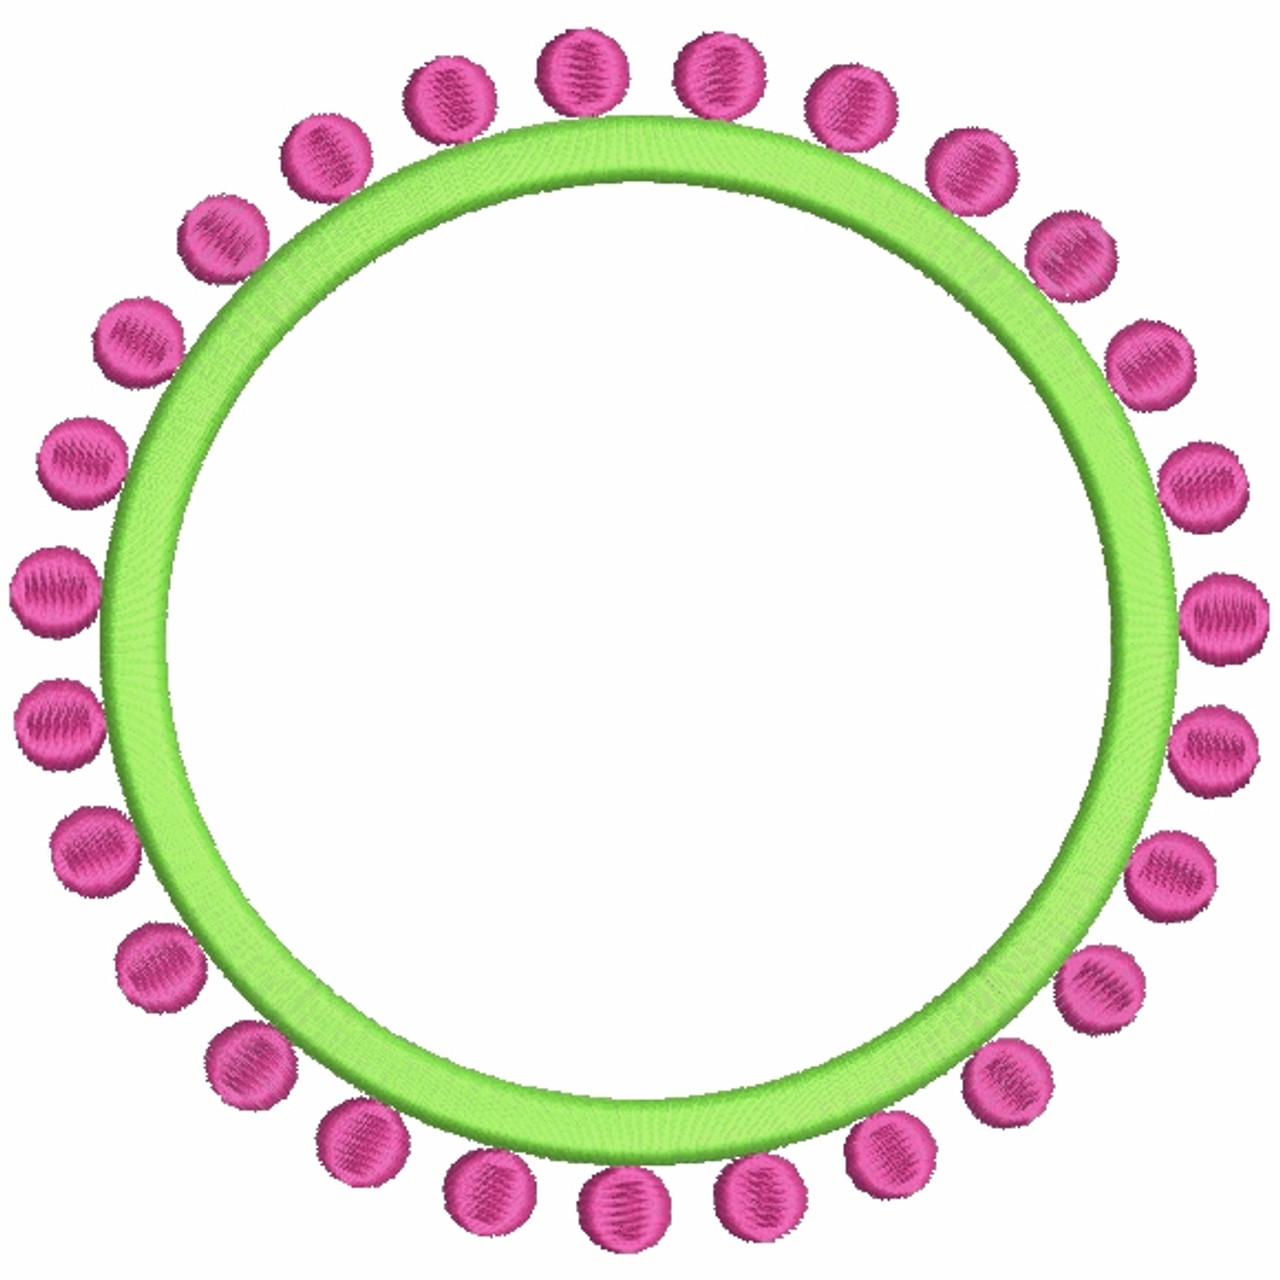 Download 394 Preppy Circle Dots Monogram or Font Frames Embroidery ...